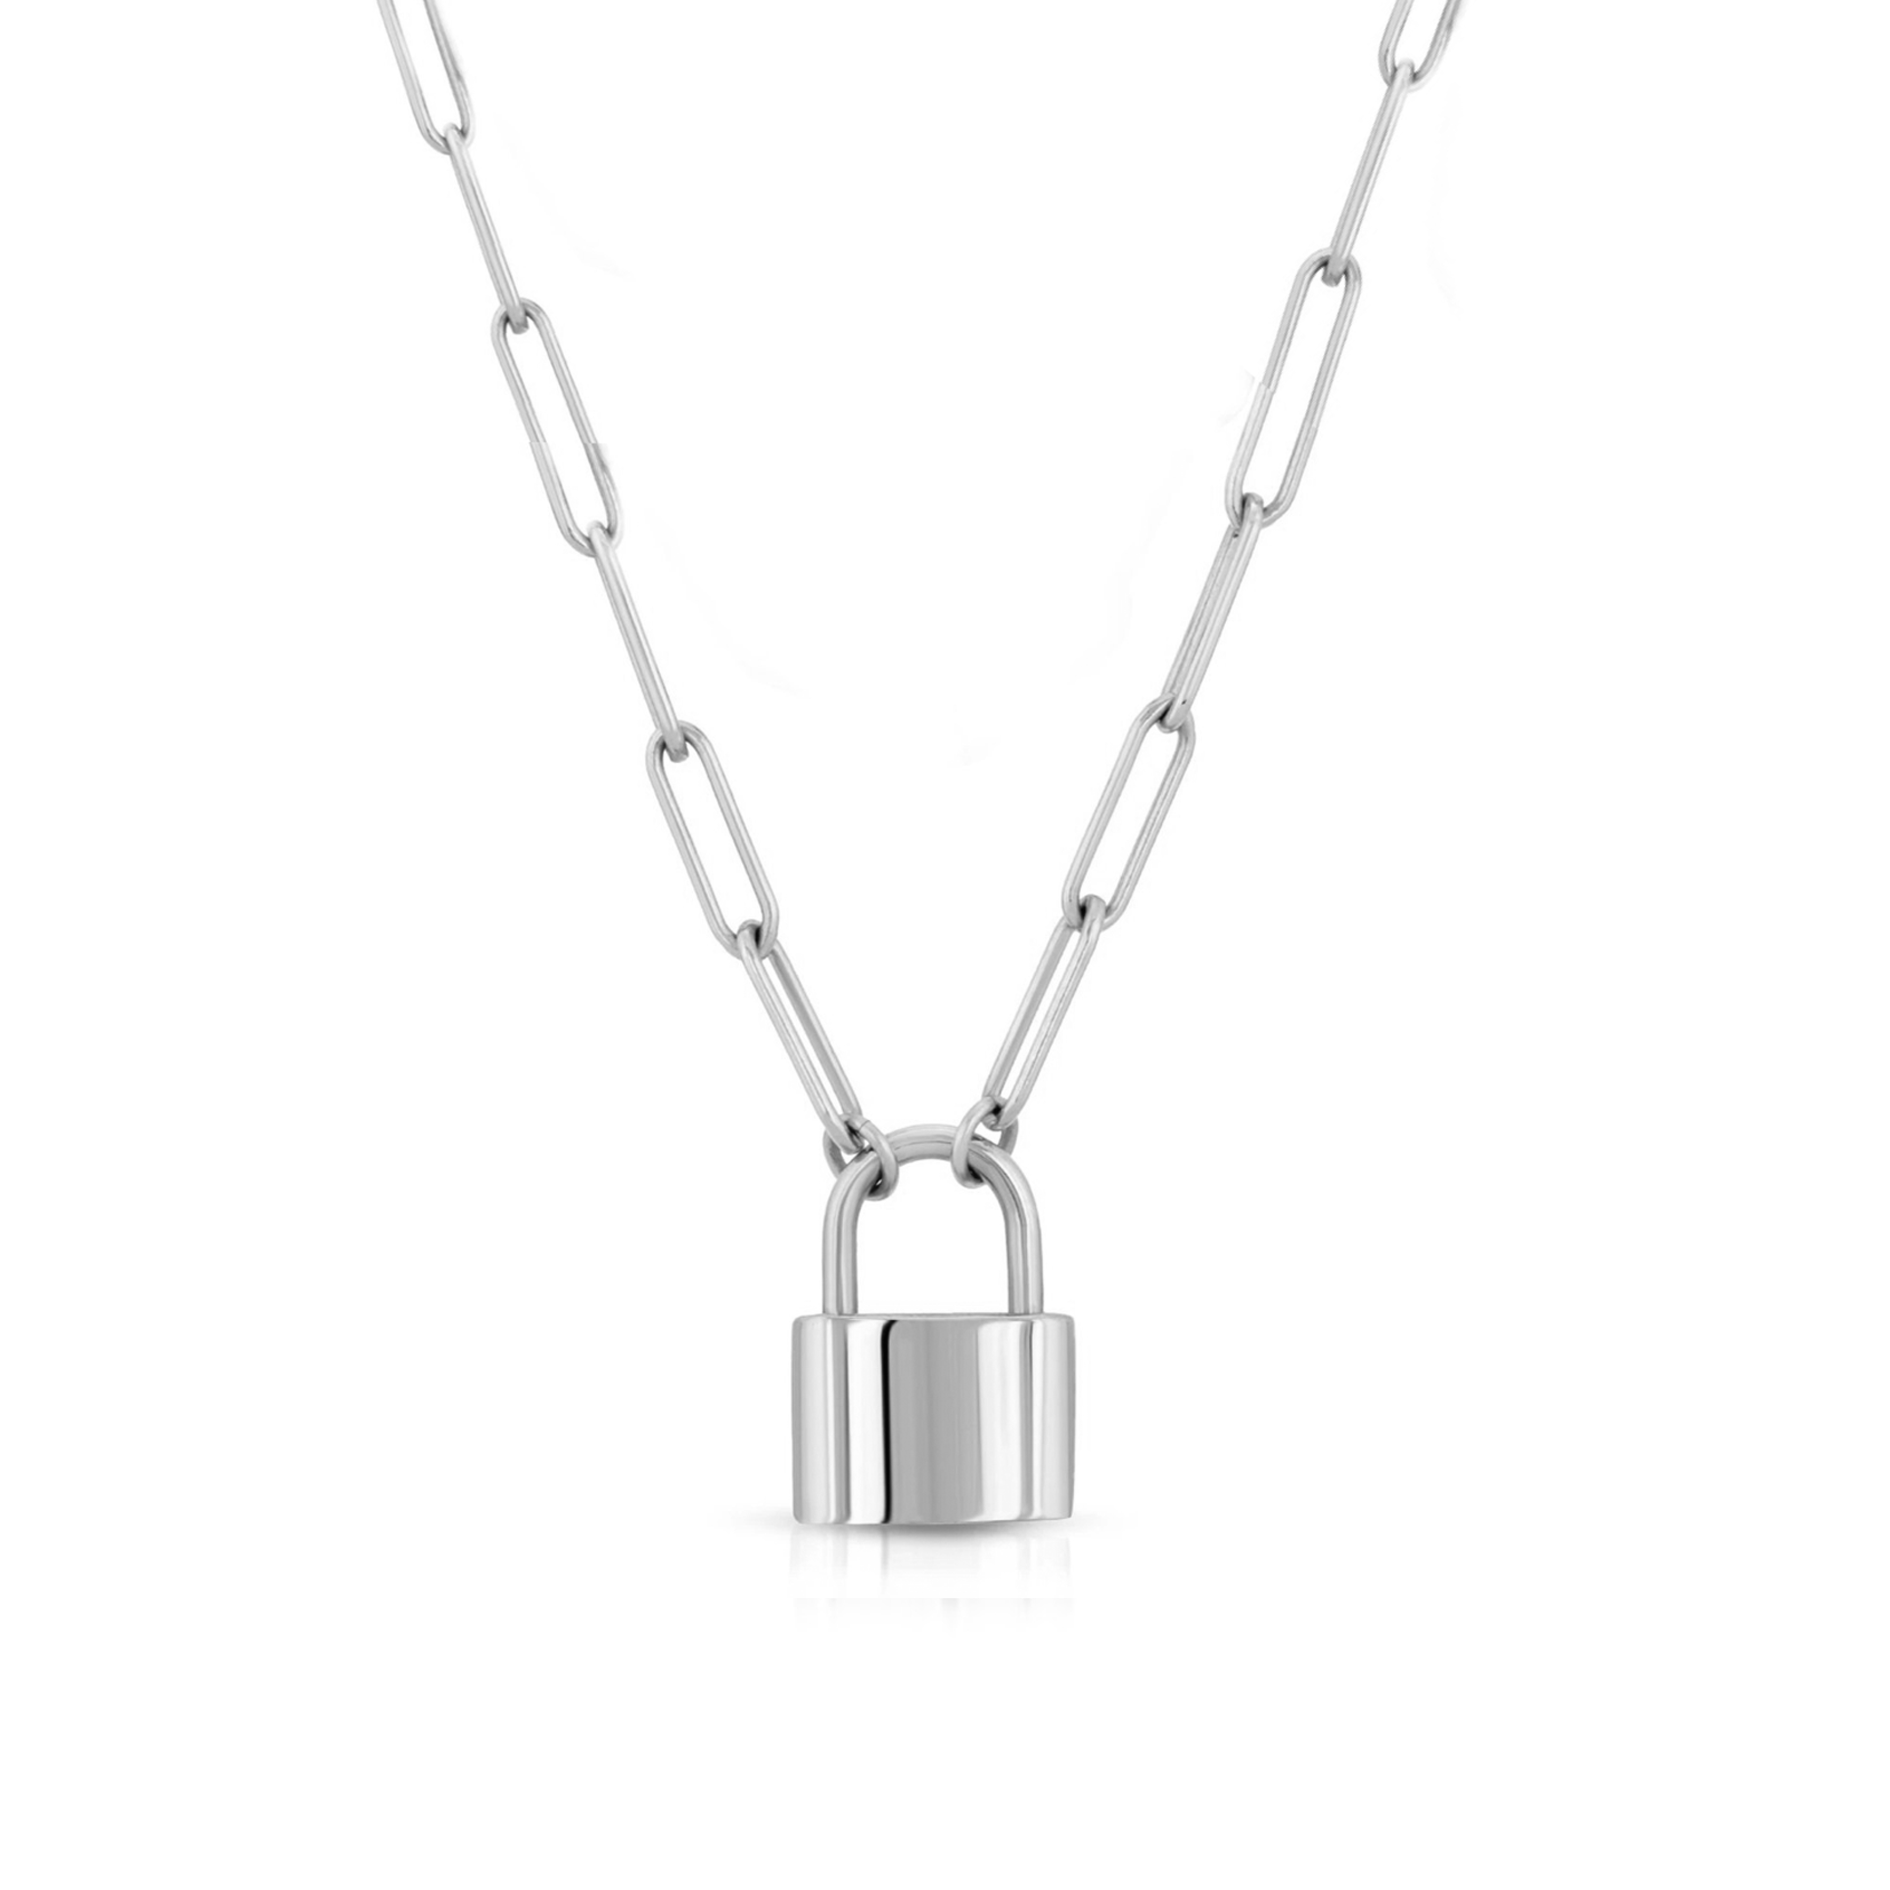 John Varvatos PADLOCK Chain Necklace for Men in Silver and Brass